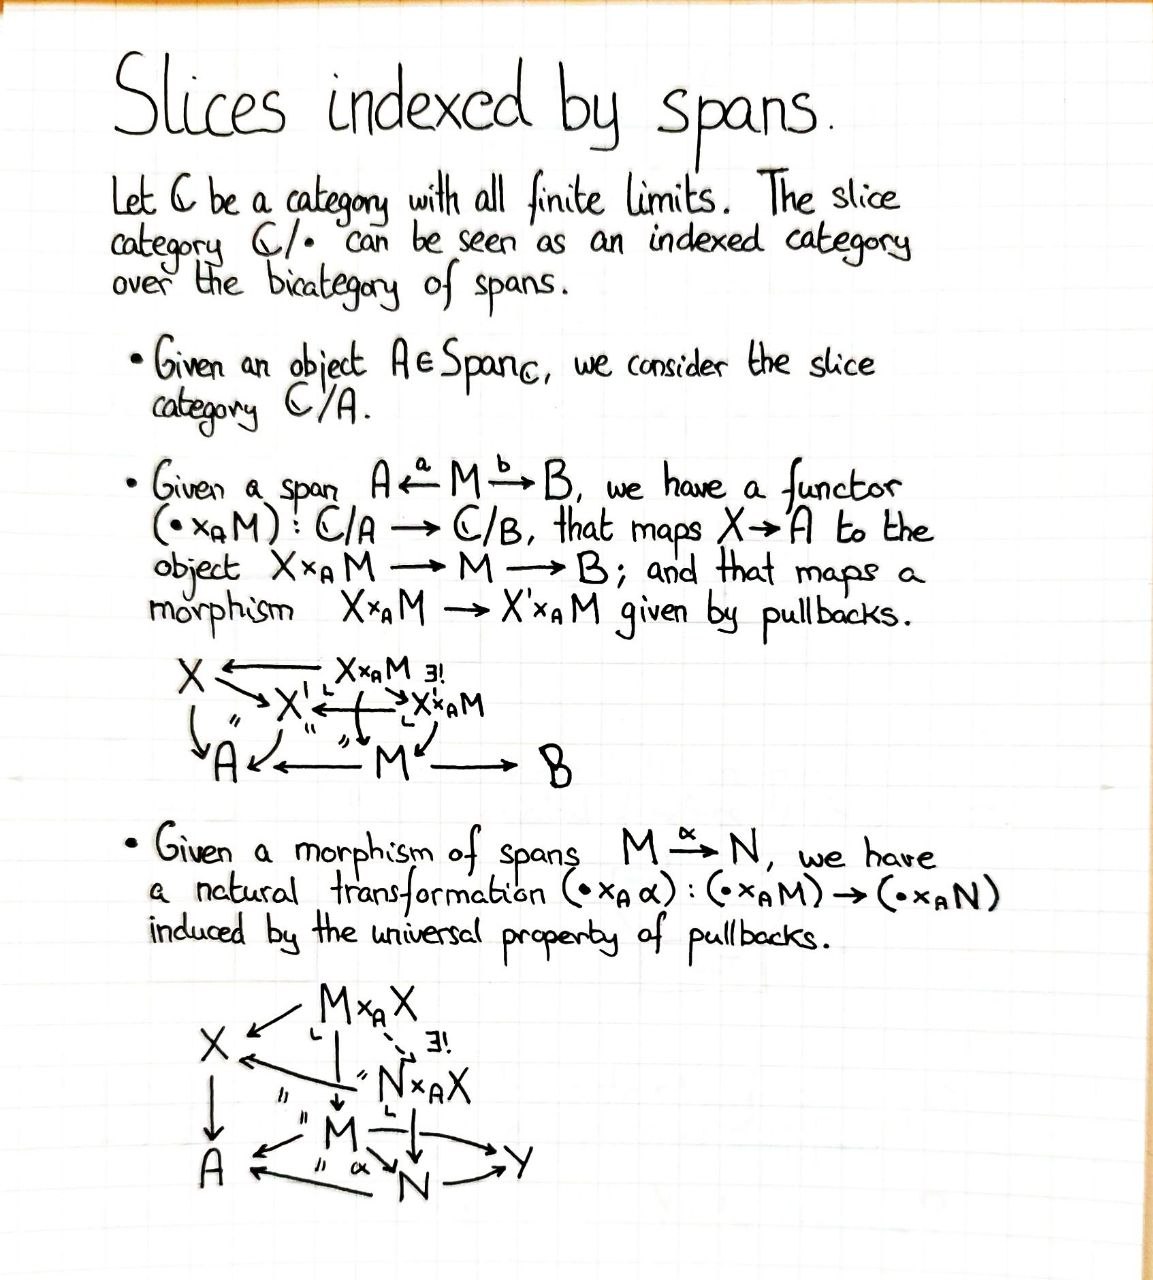 slices-indexed-by-spans